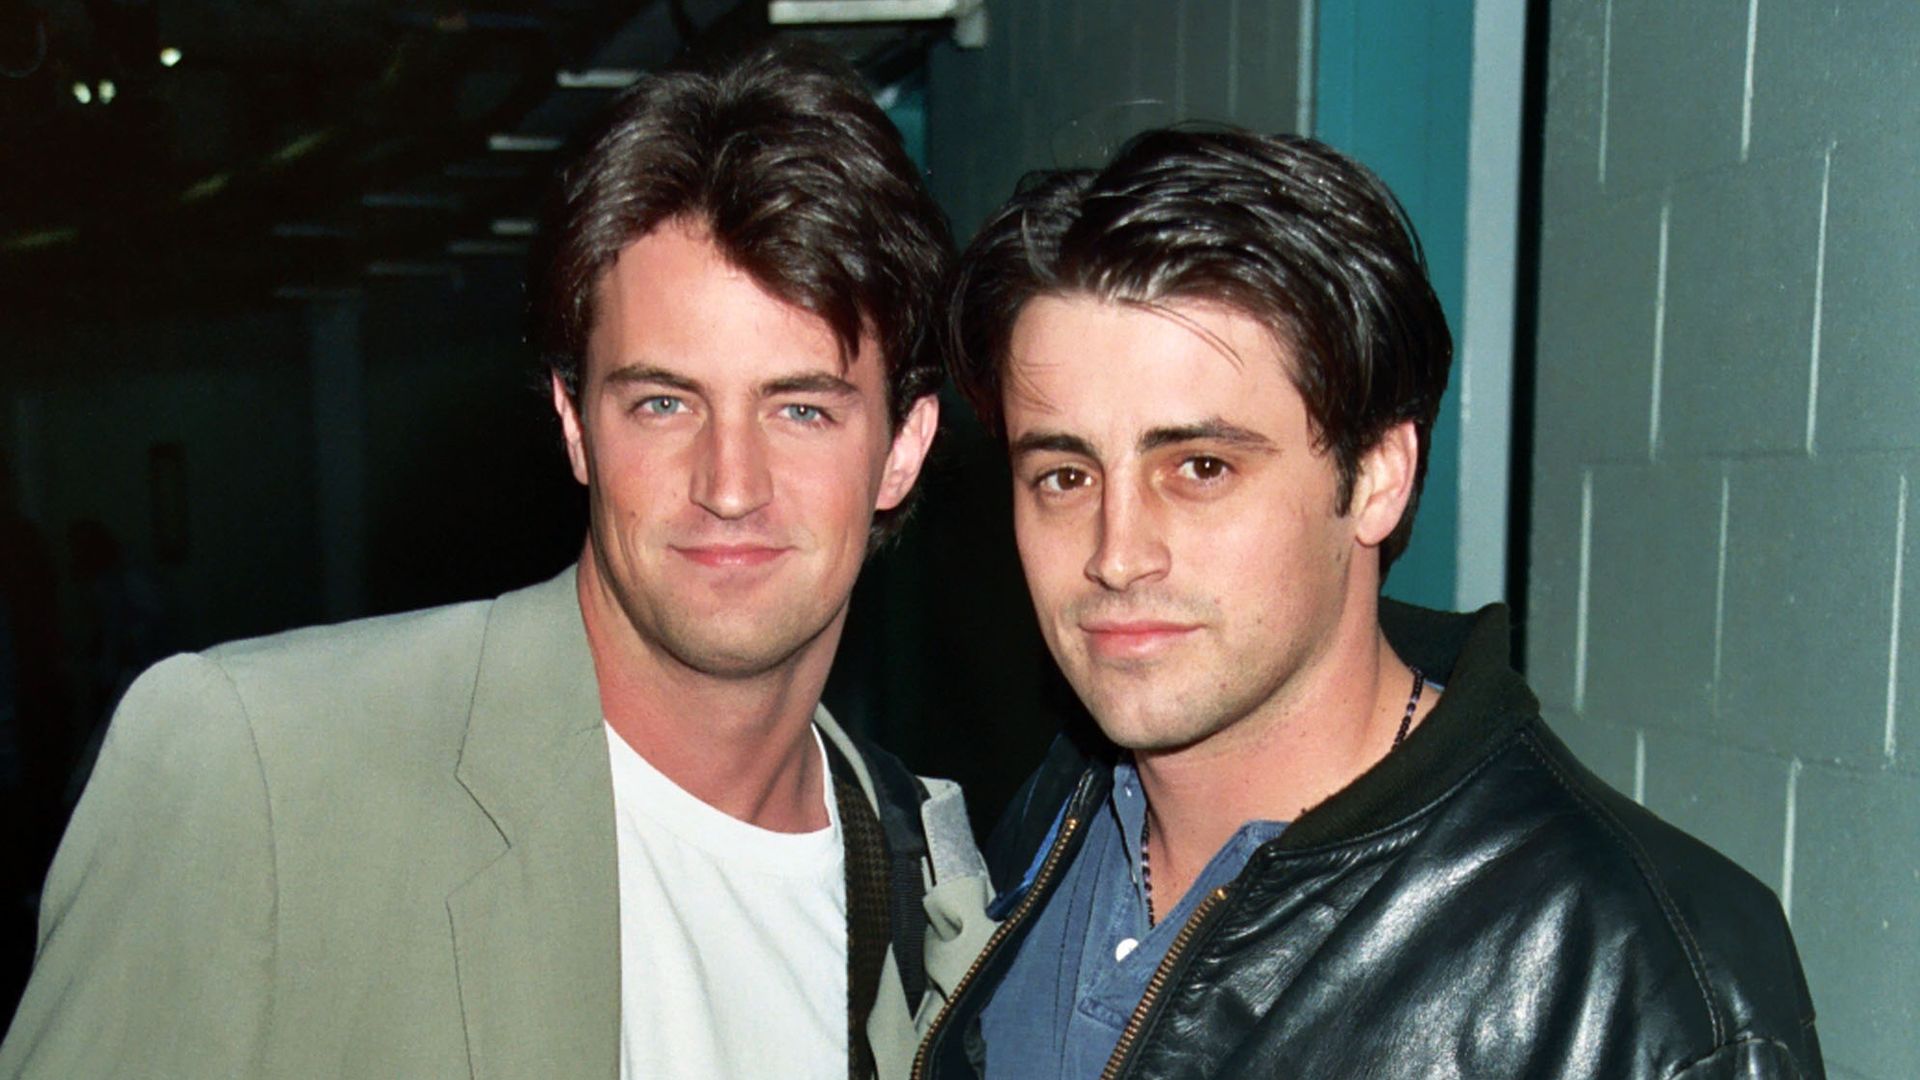 Matthew Perry and Matt LeBlanc during Homeless 4 Hockey at The Forum in Los Angeles, CA, United States.